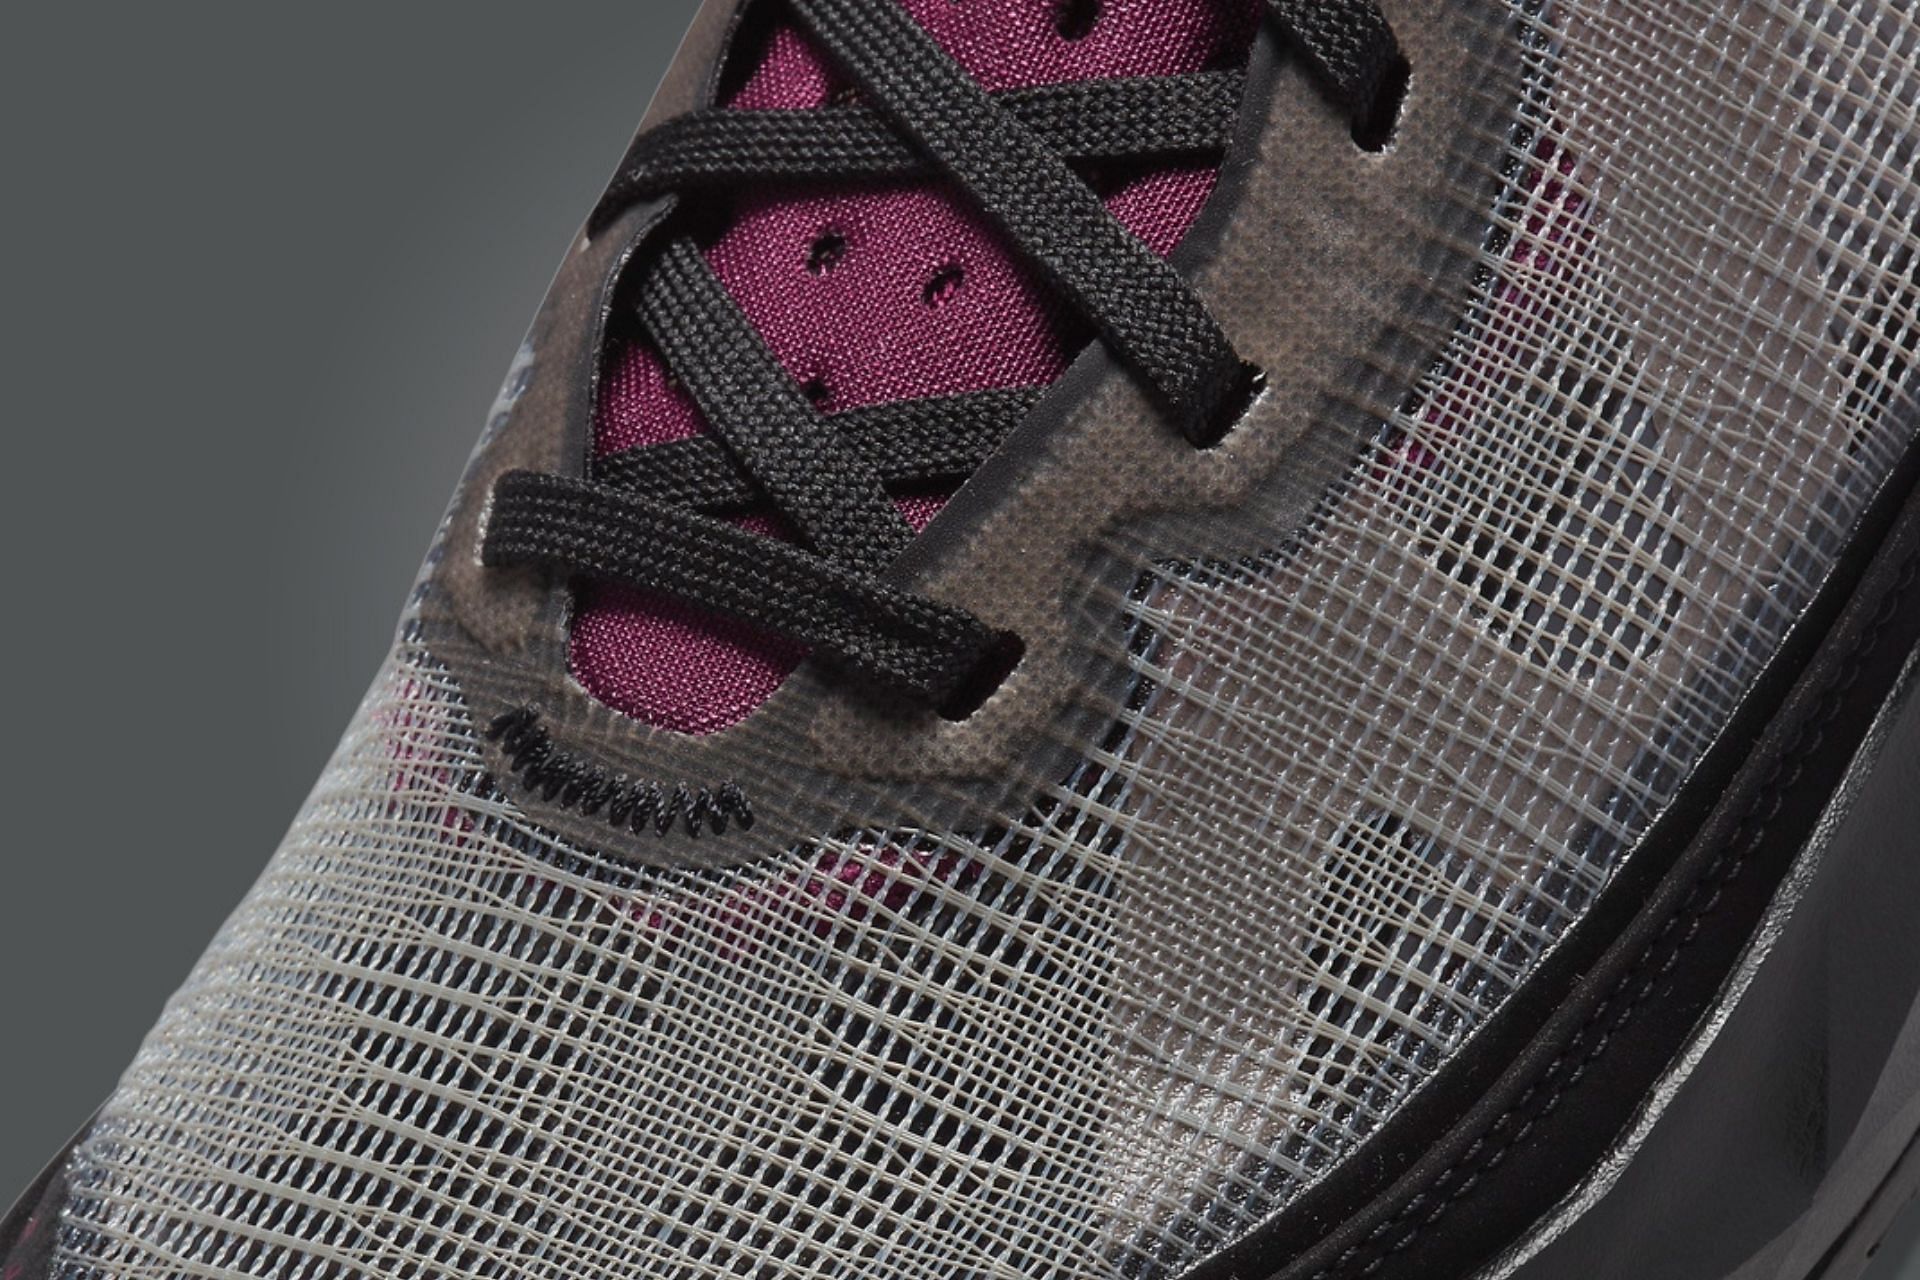 Take a closer look at the Lenoweave uppers of the shoes (Image via Nike)